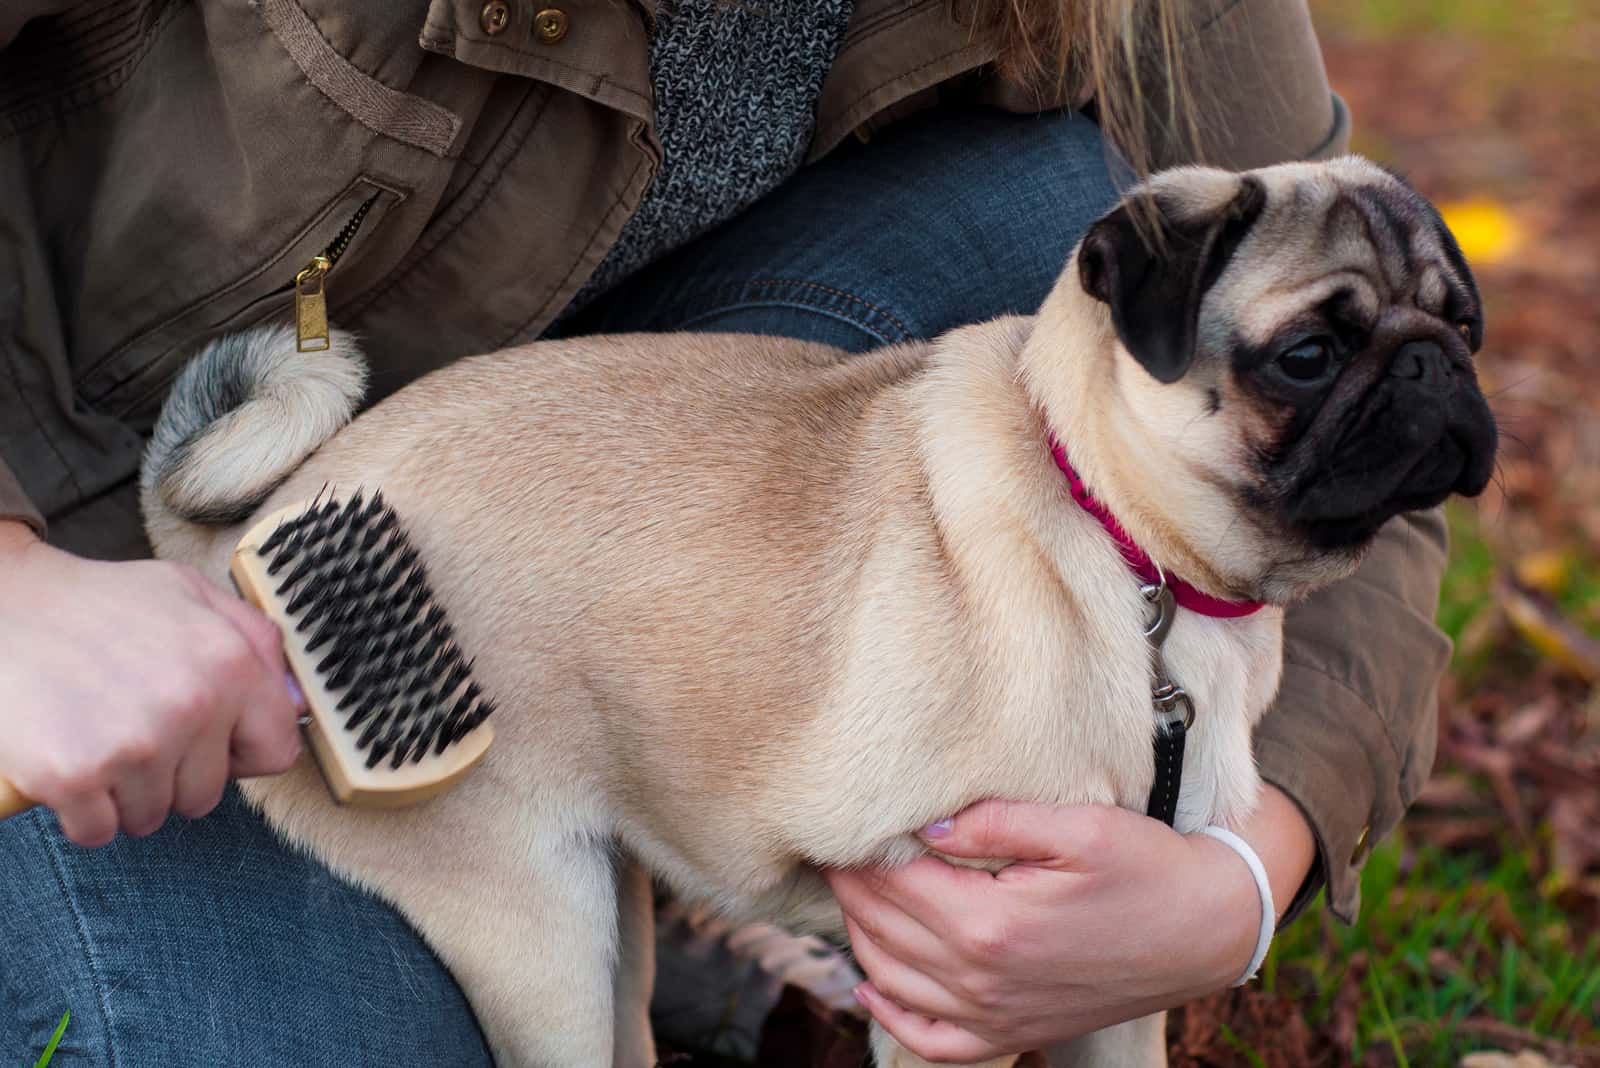 owner holding her pug and brushing his hair